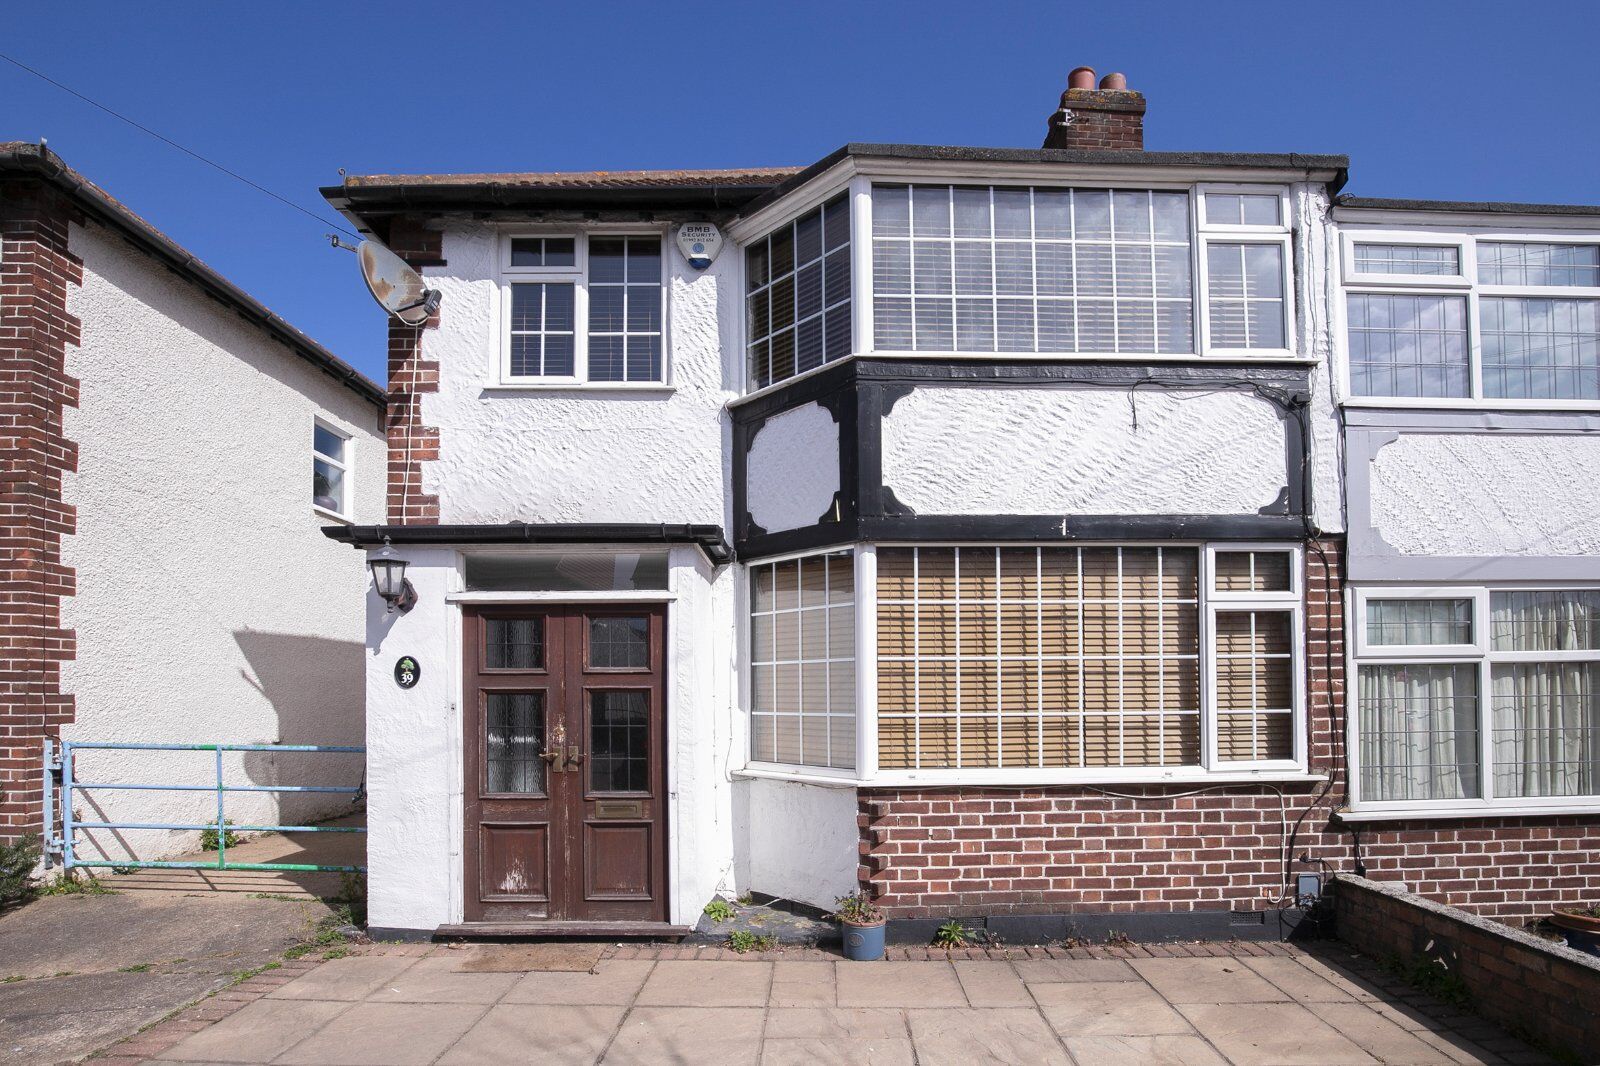 3 bedroom end terraced house for sale Highland Avenue, Loughton, IG10, main image